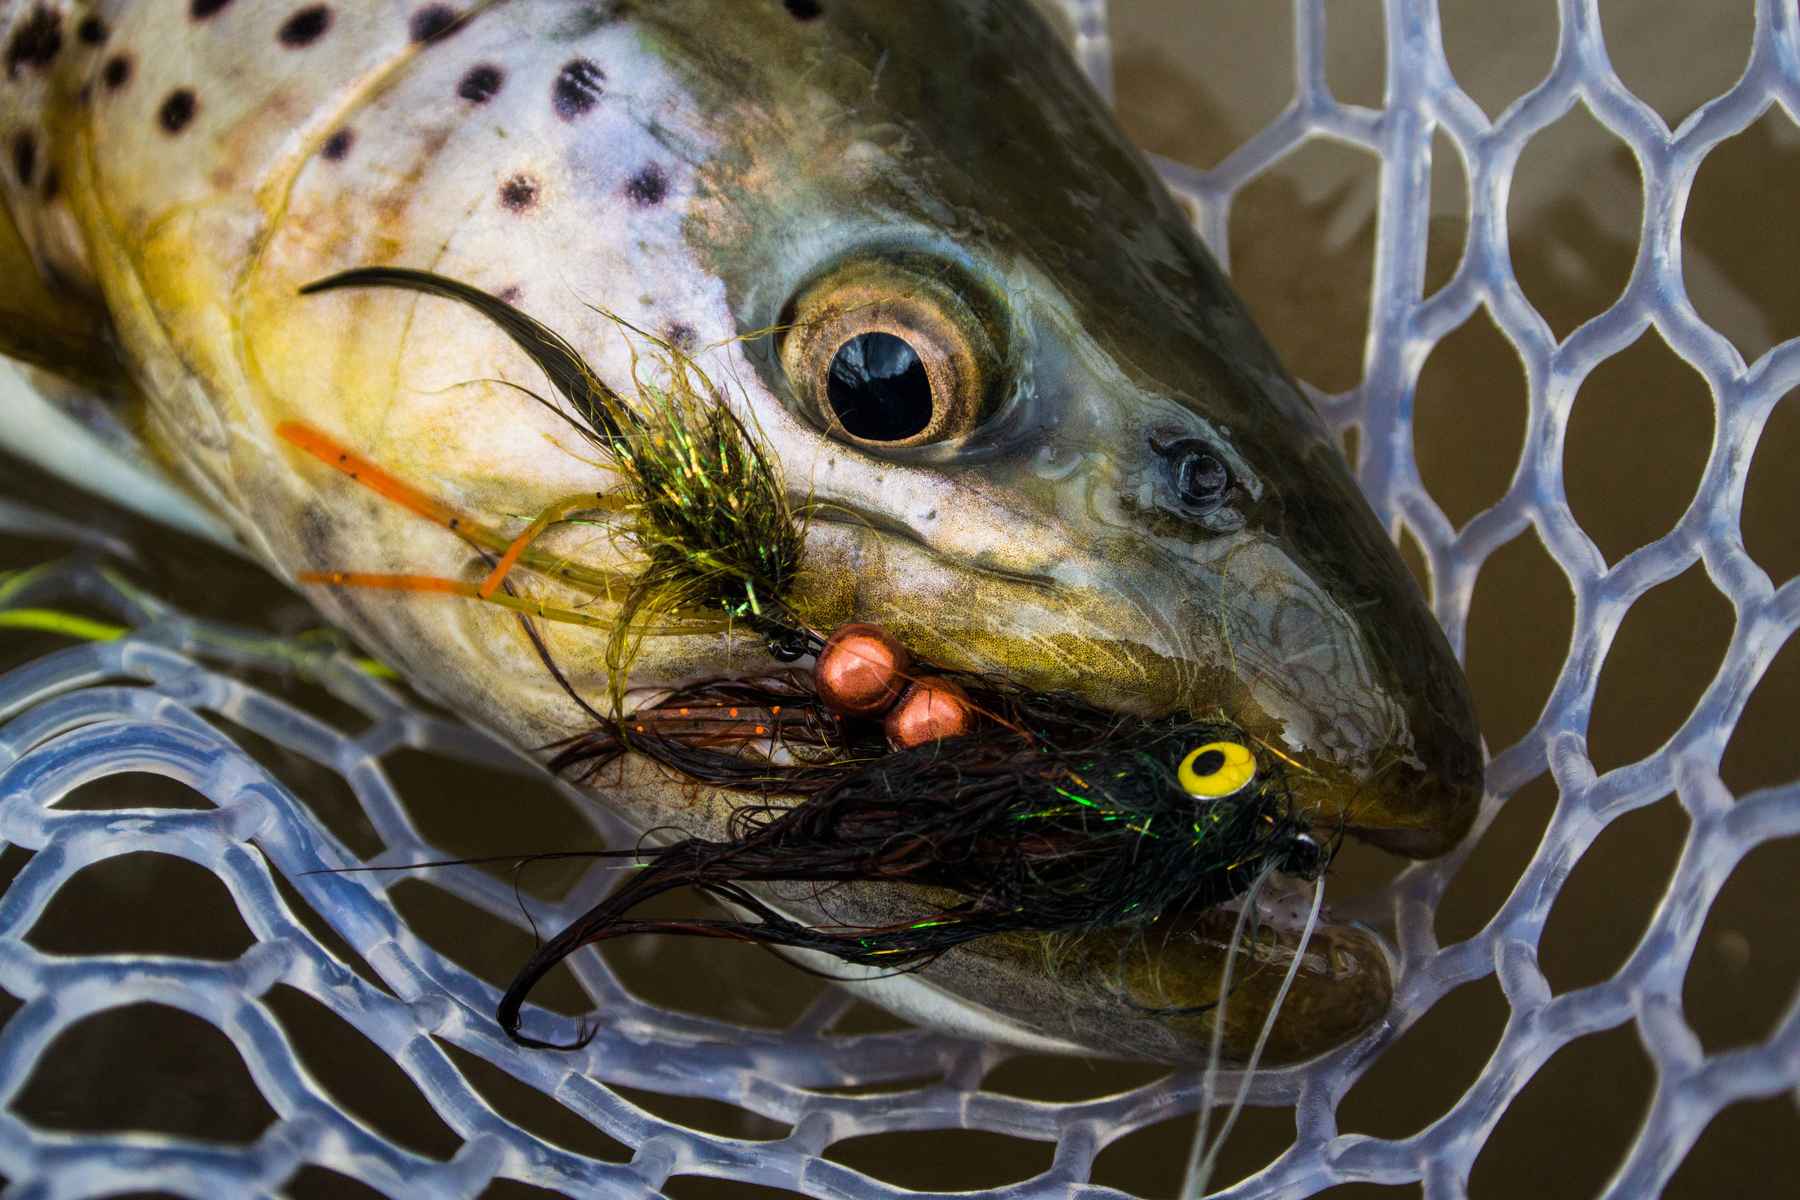 Slug zombies are the perfect spring streamer 🍖 #flyfishing